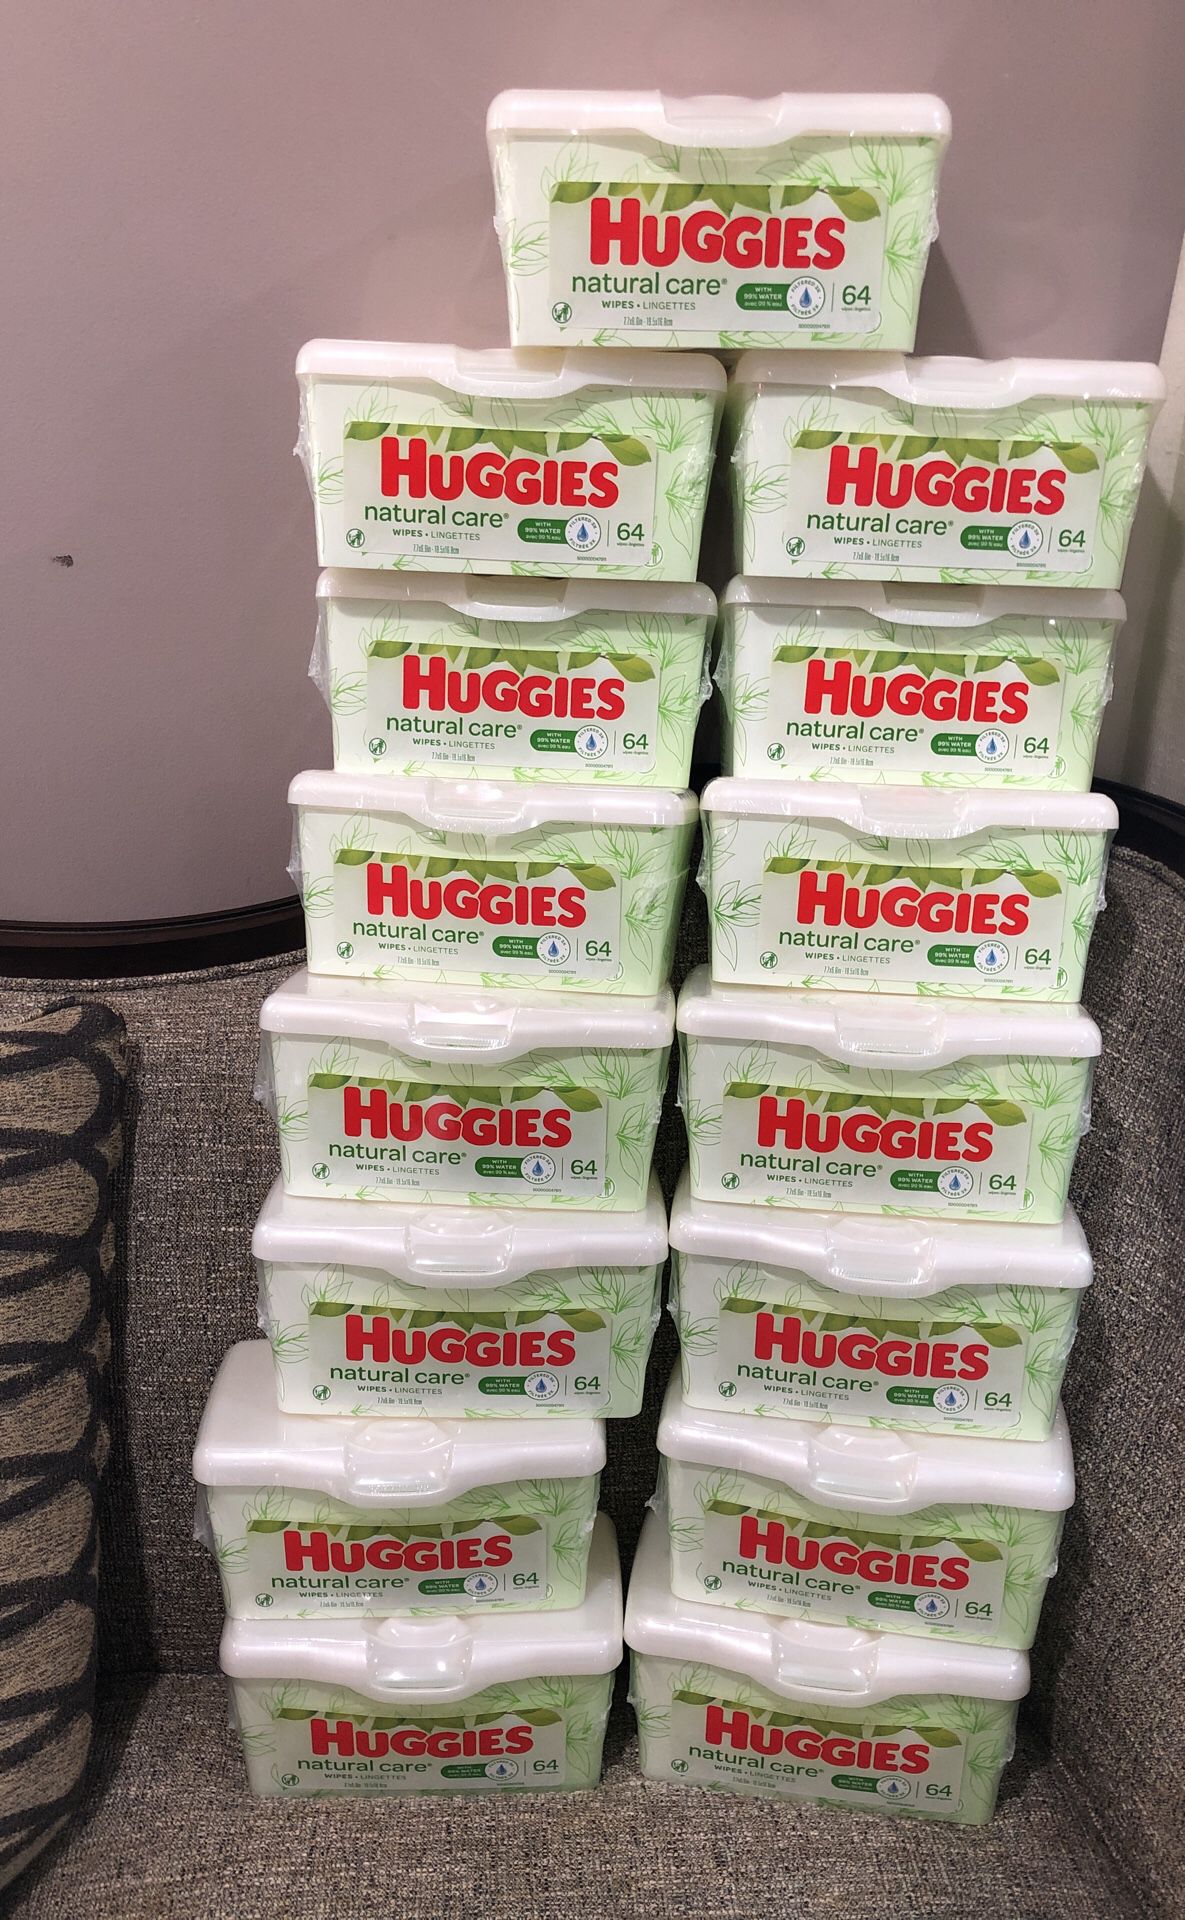 15 of Huggies wipes. Please see all the pictures and read the description